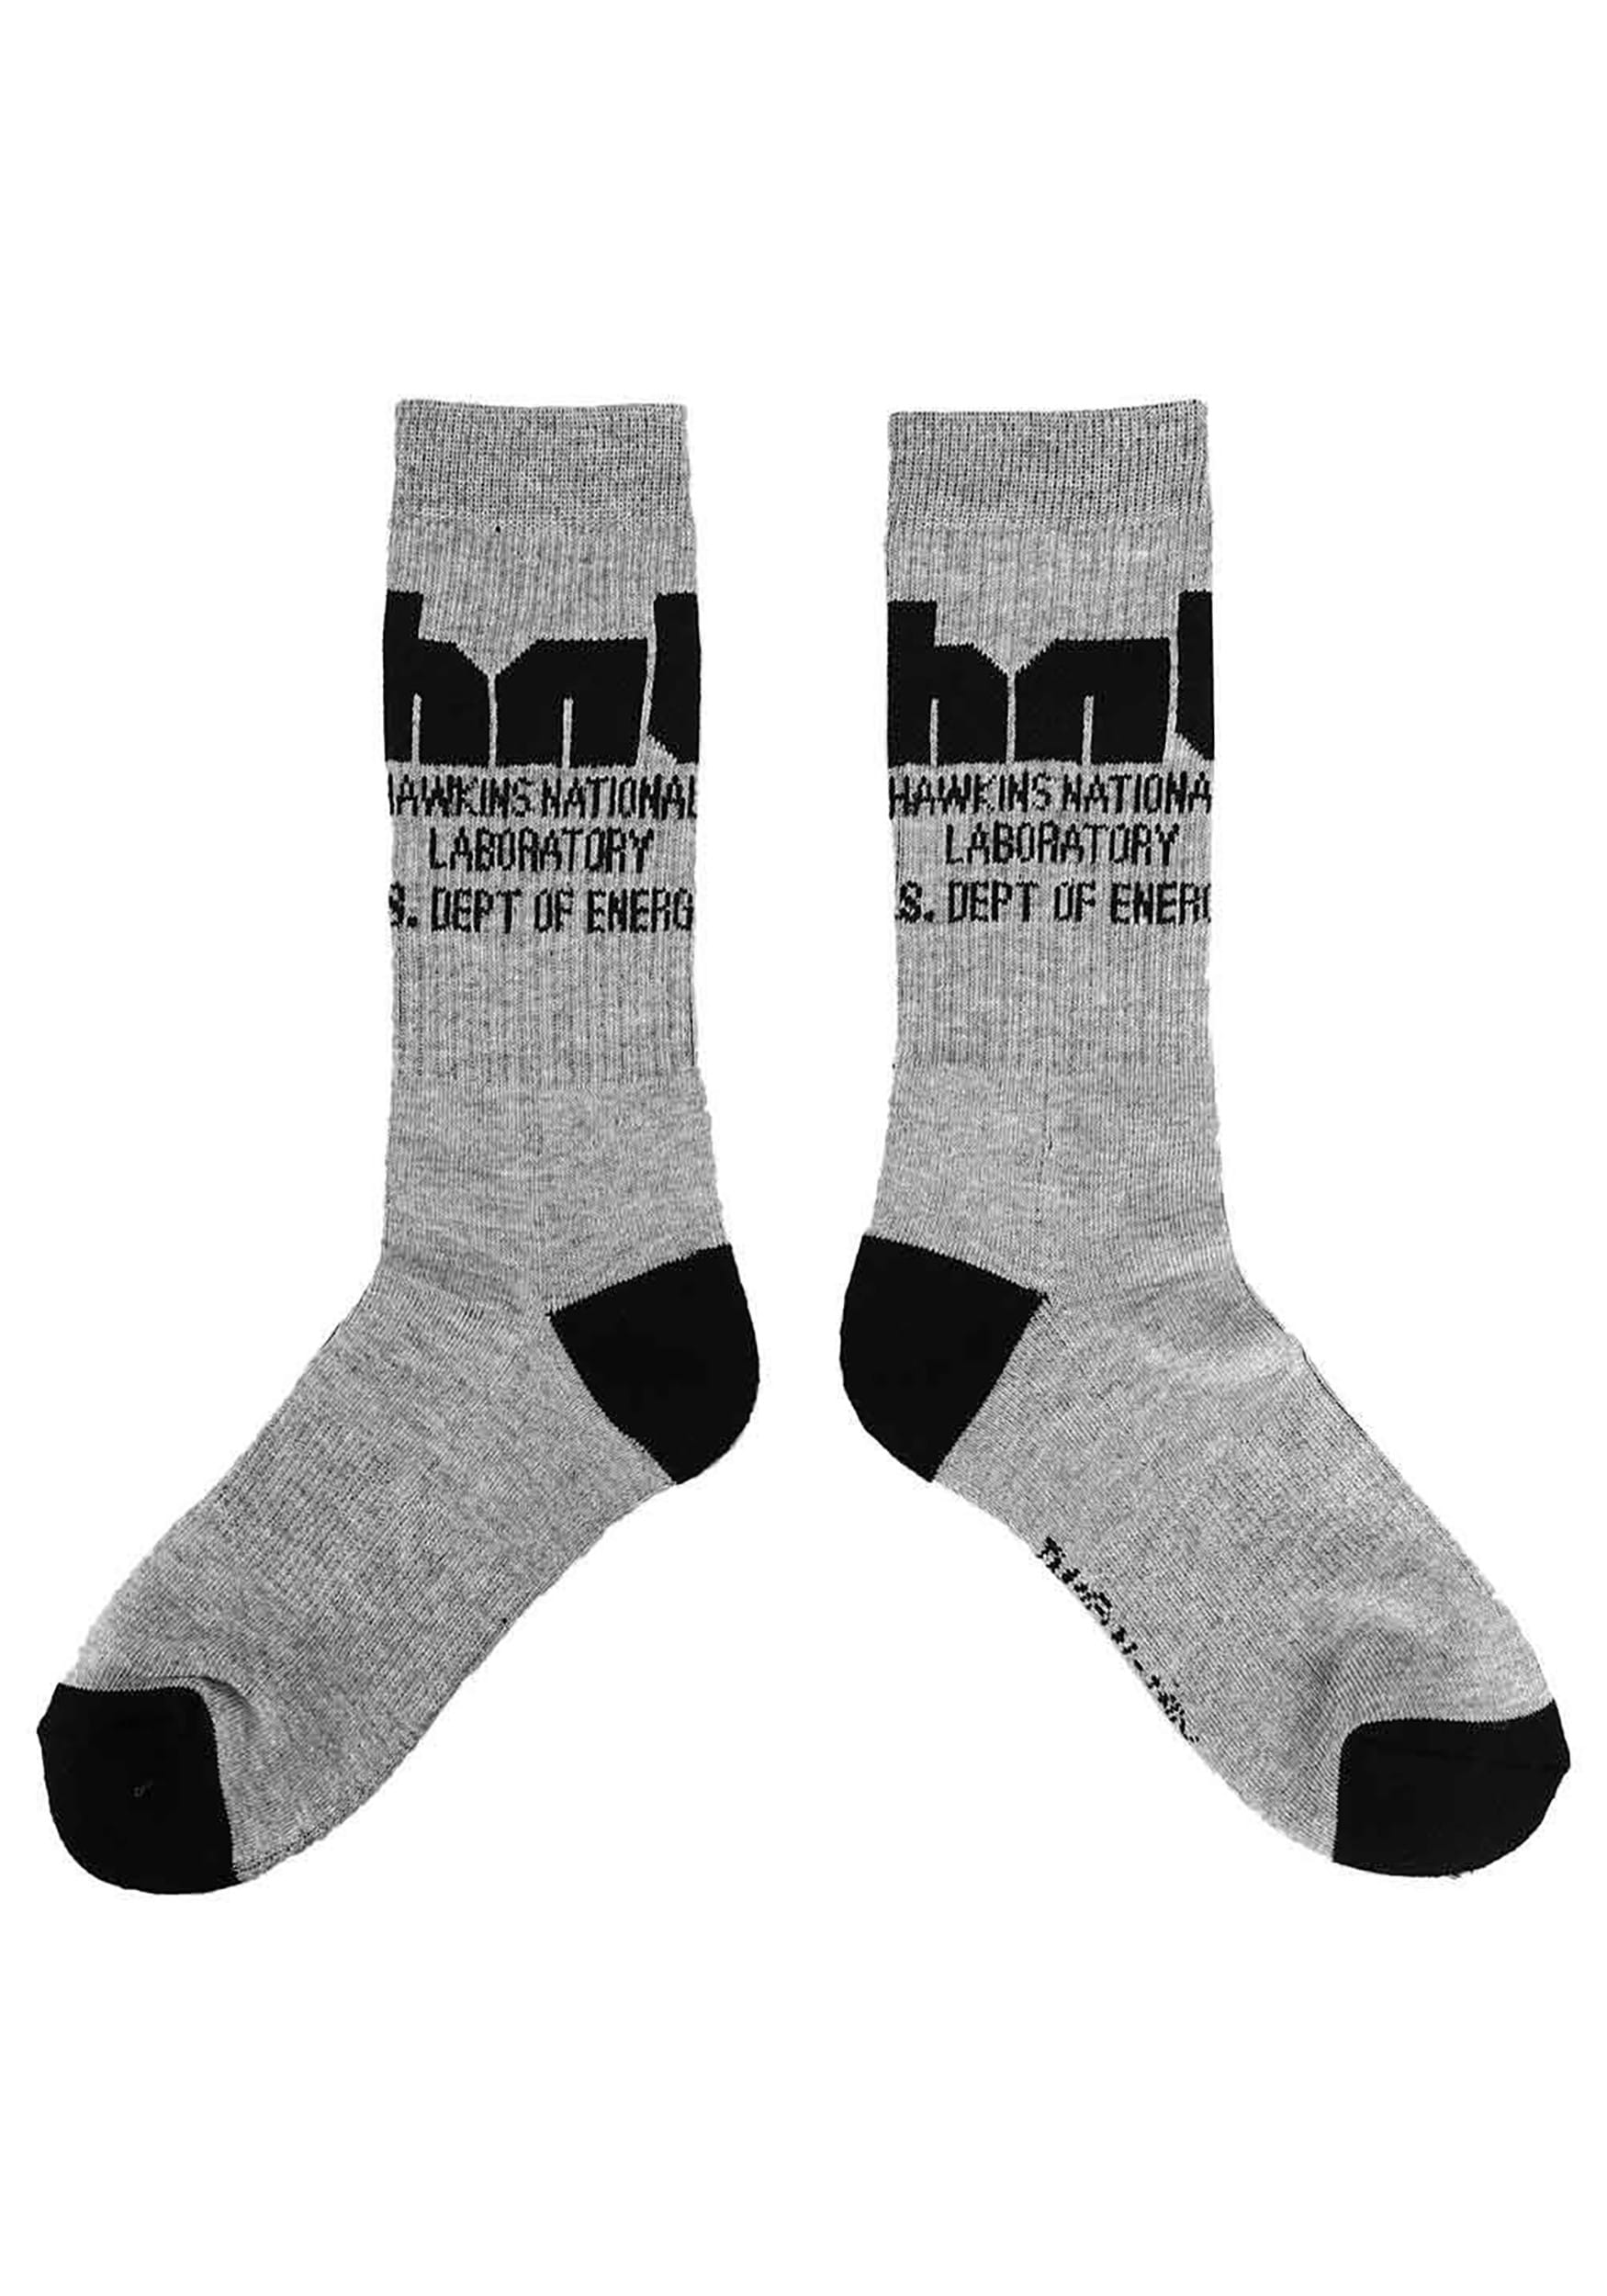 https://images.fun.com/products/82485/2-1-220629/adult-stranger-things-icon-3-pair-crew-socks-alt-1.jpg